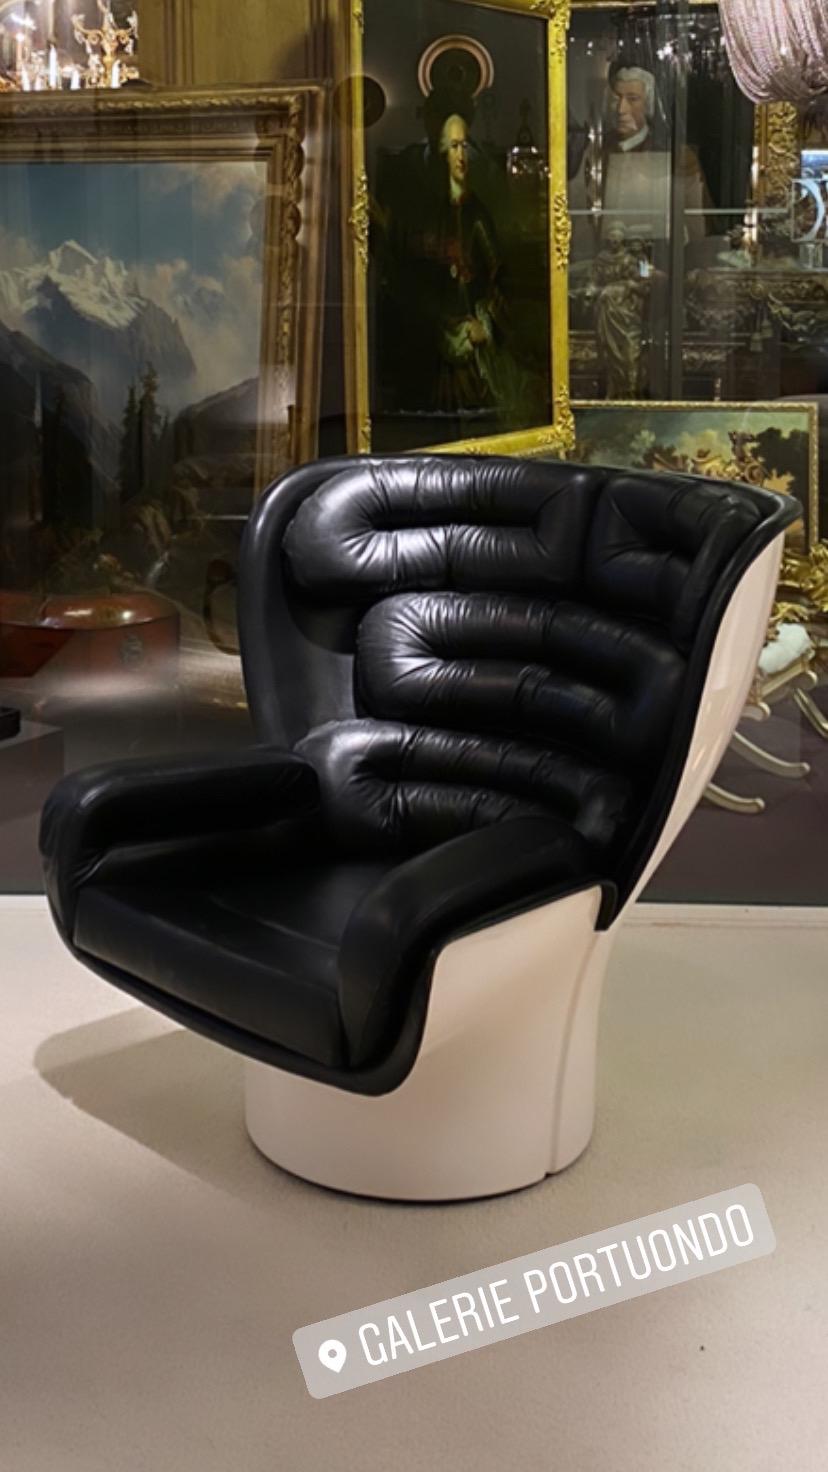 Elda armchair by Joe Colombo
White fiber and black leather
Vintage condition, circa 1970.